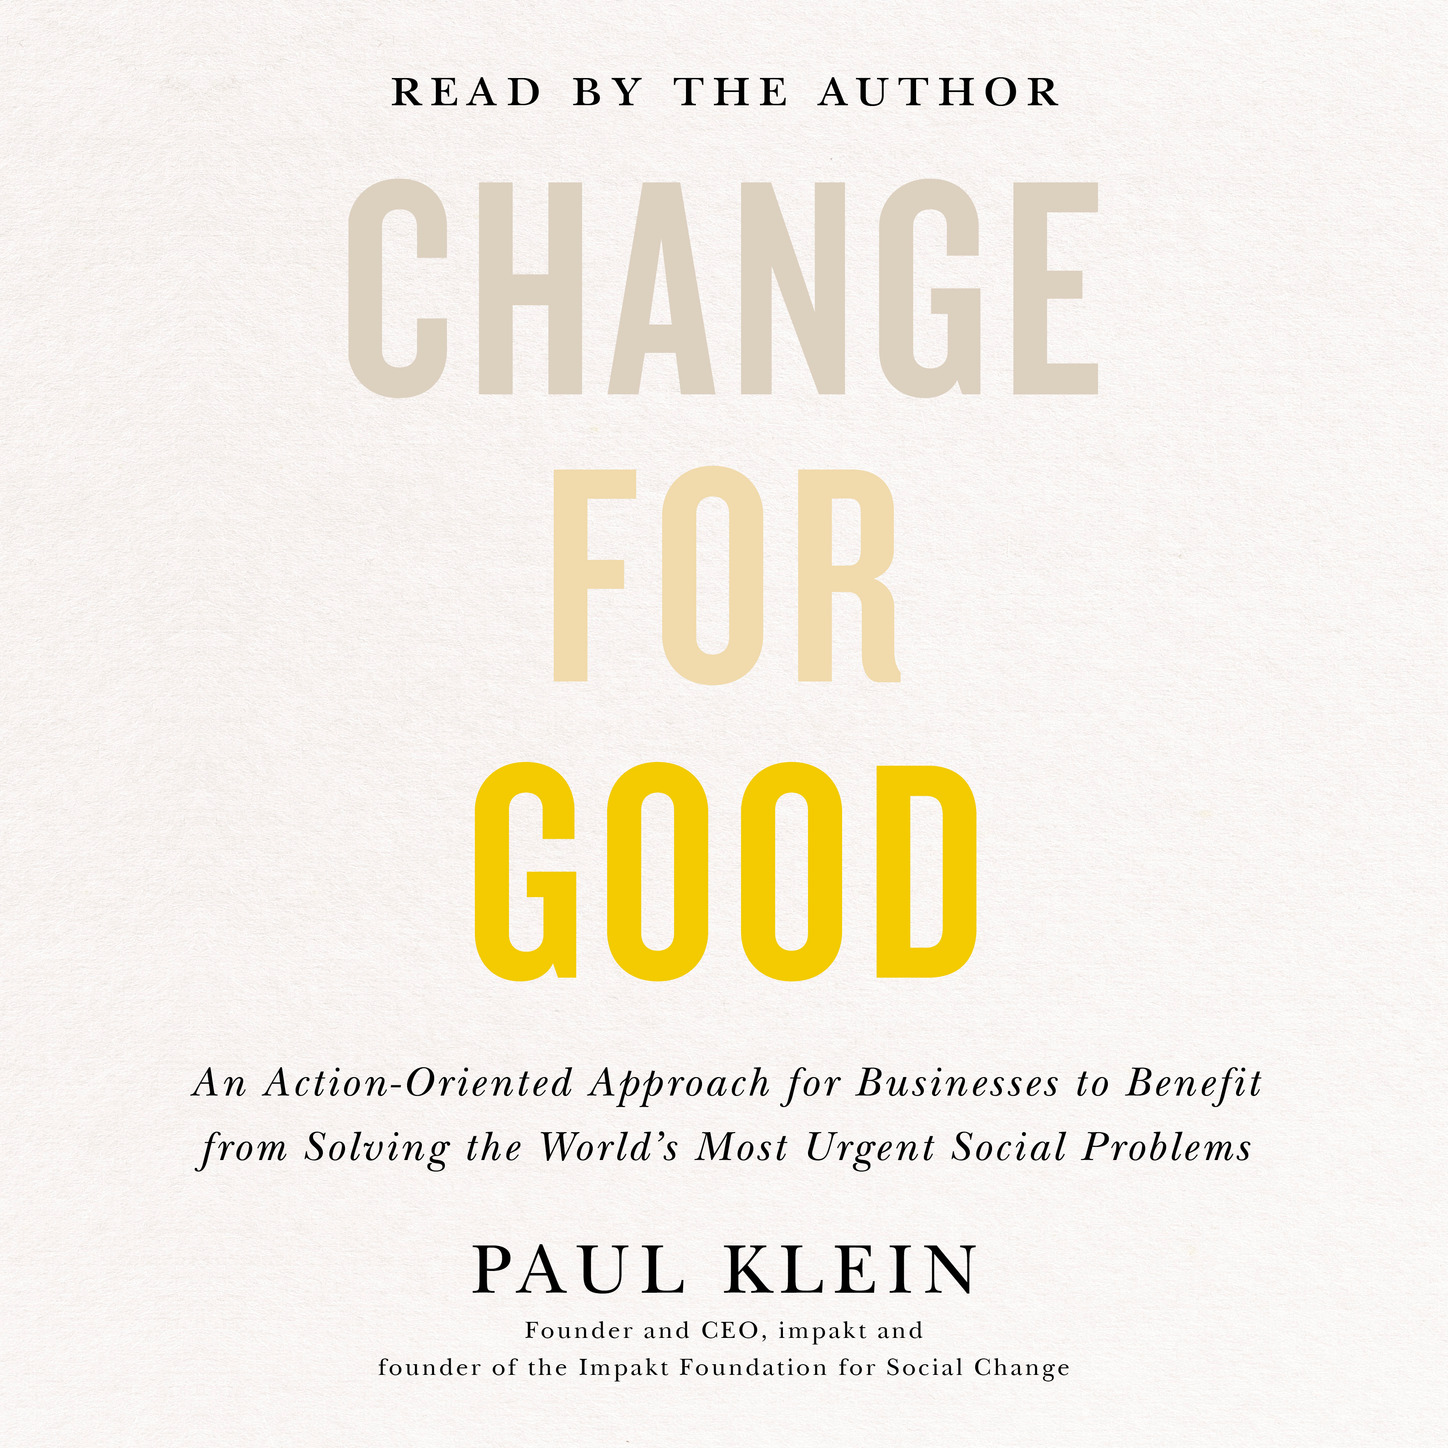 Change for Good - An Action-Oriented Approach for Businesses to Benefit from Solving the World\'s Most Urgent Social Problems (Unabridged)